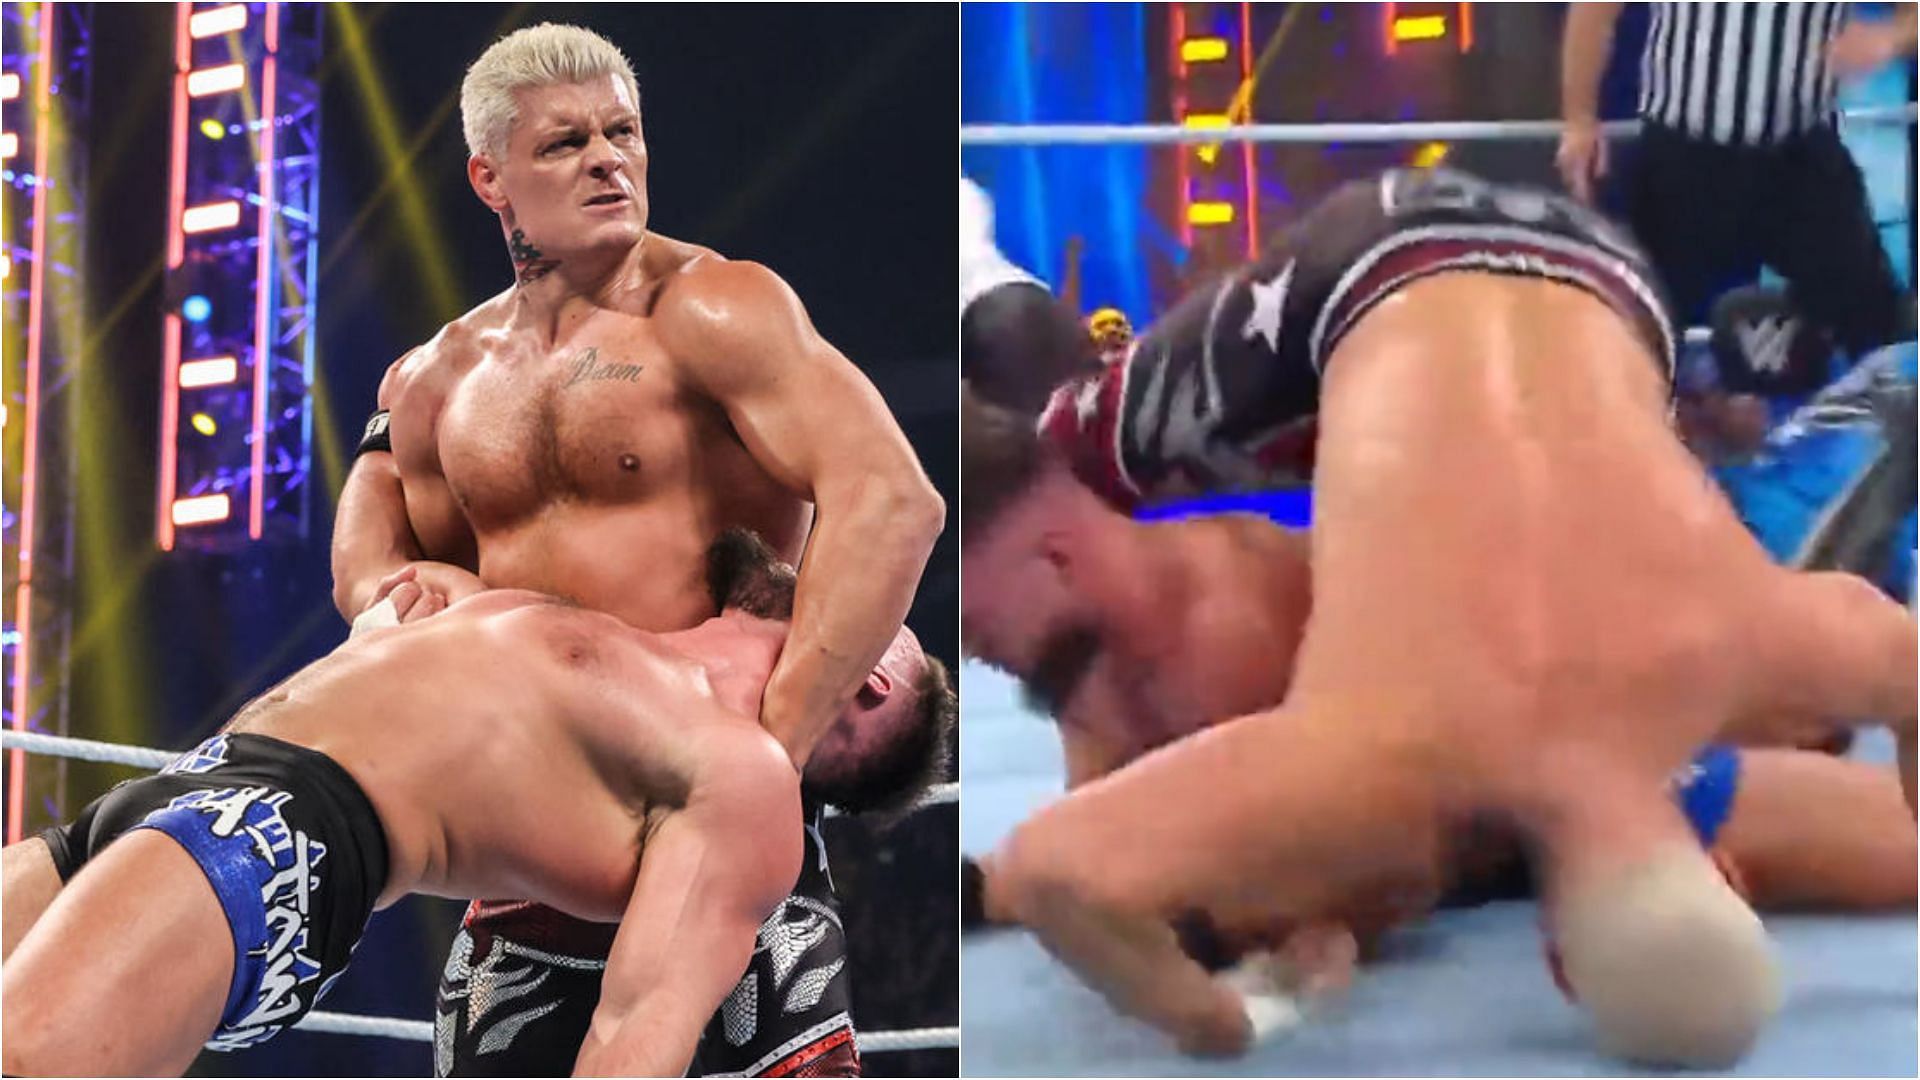 Cody Rhodes has been having a tough time hitting a move in WWE.